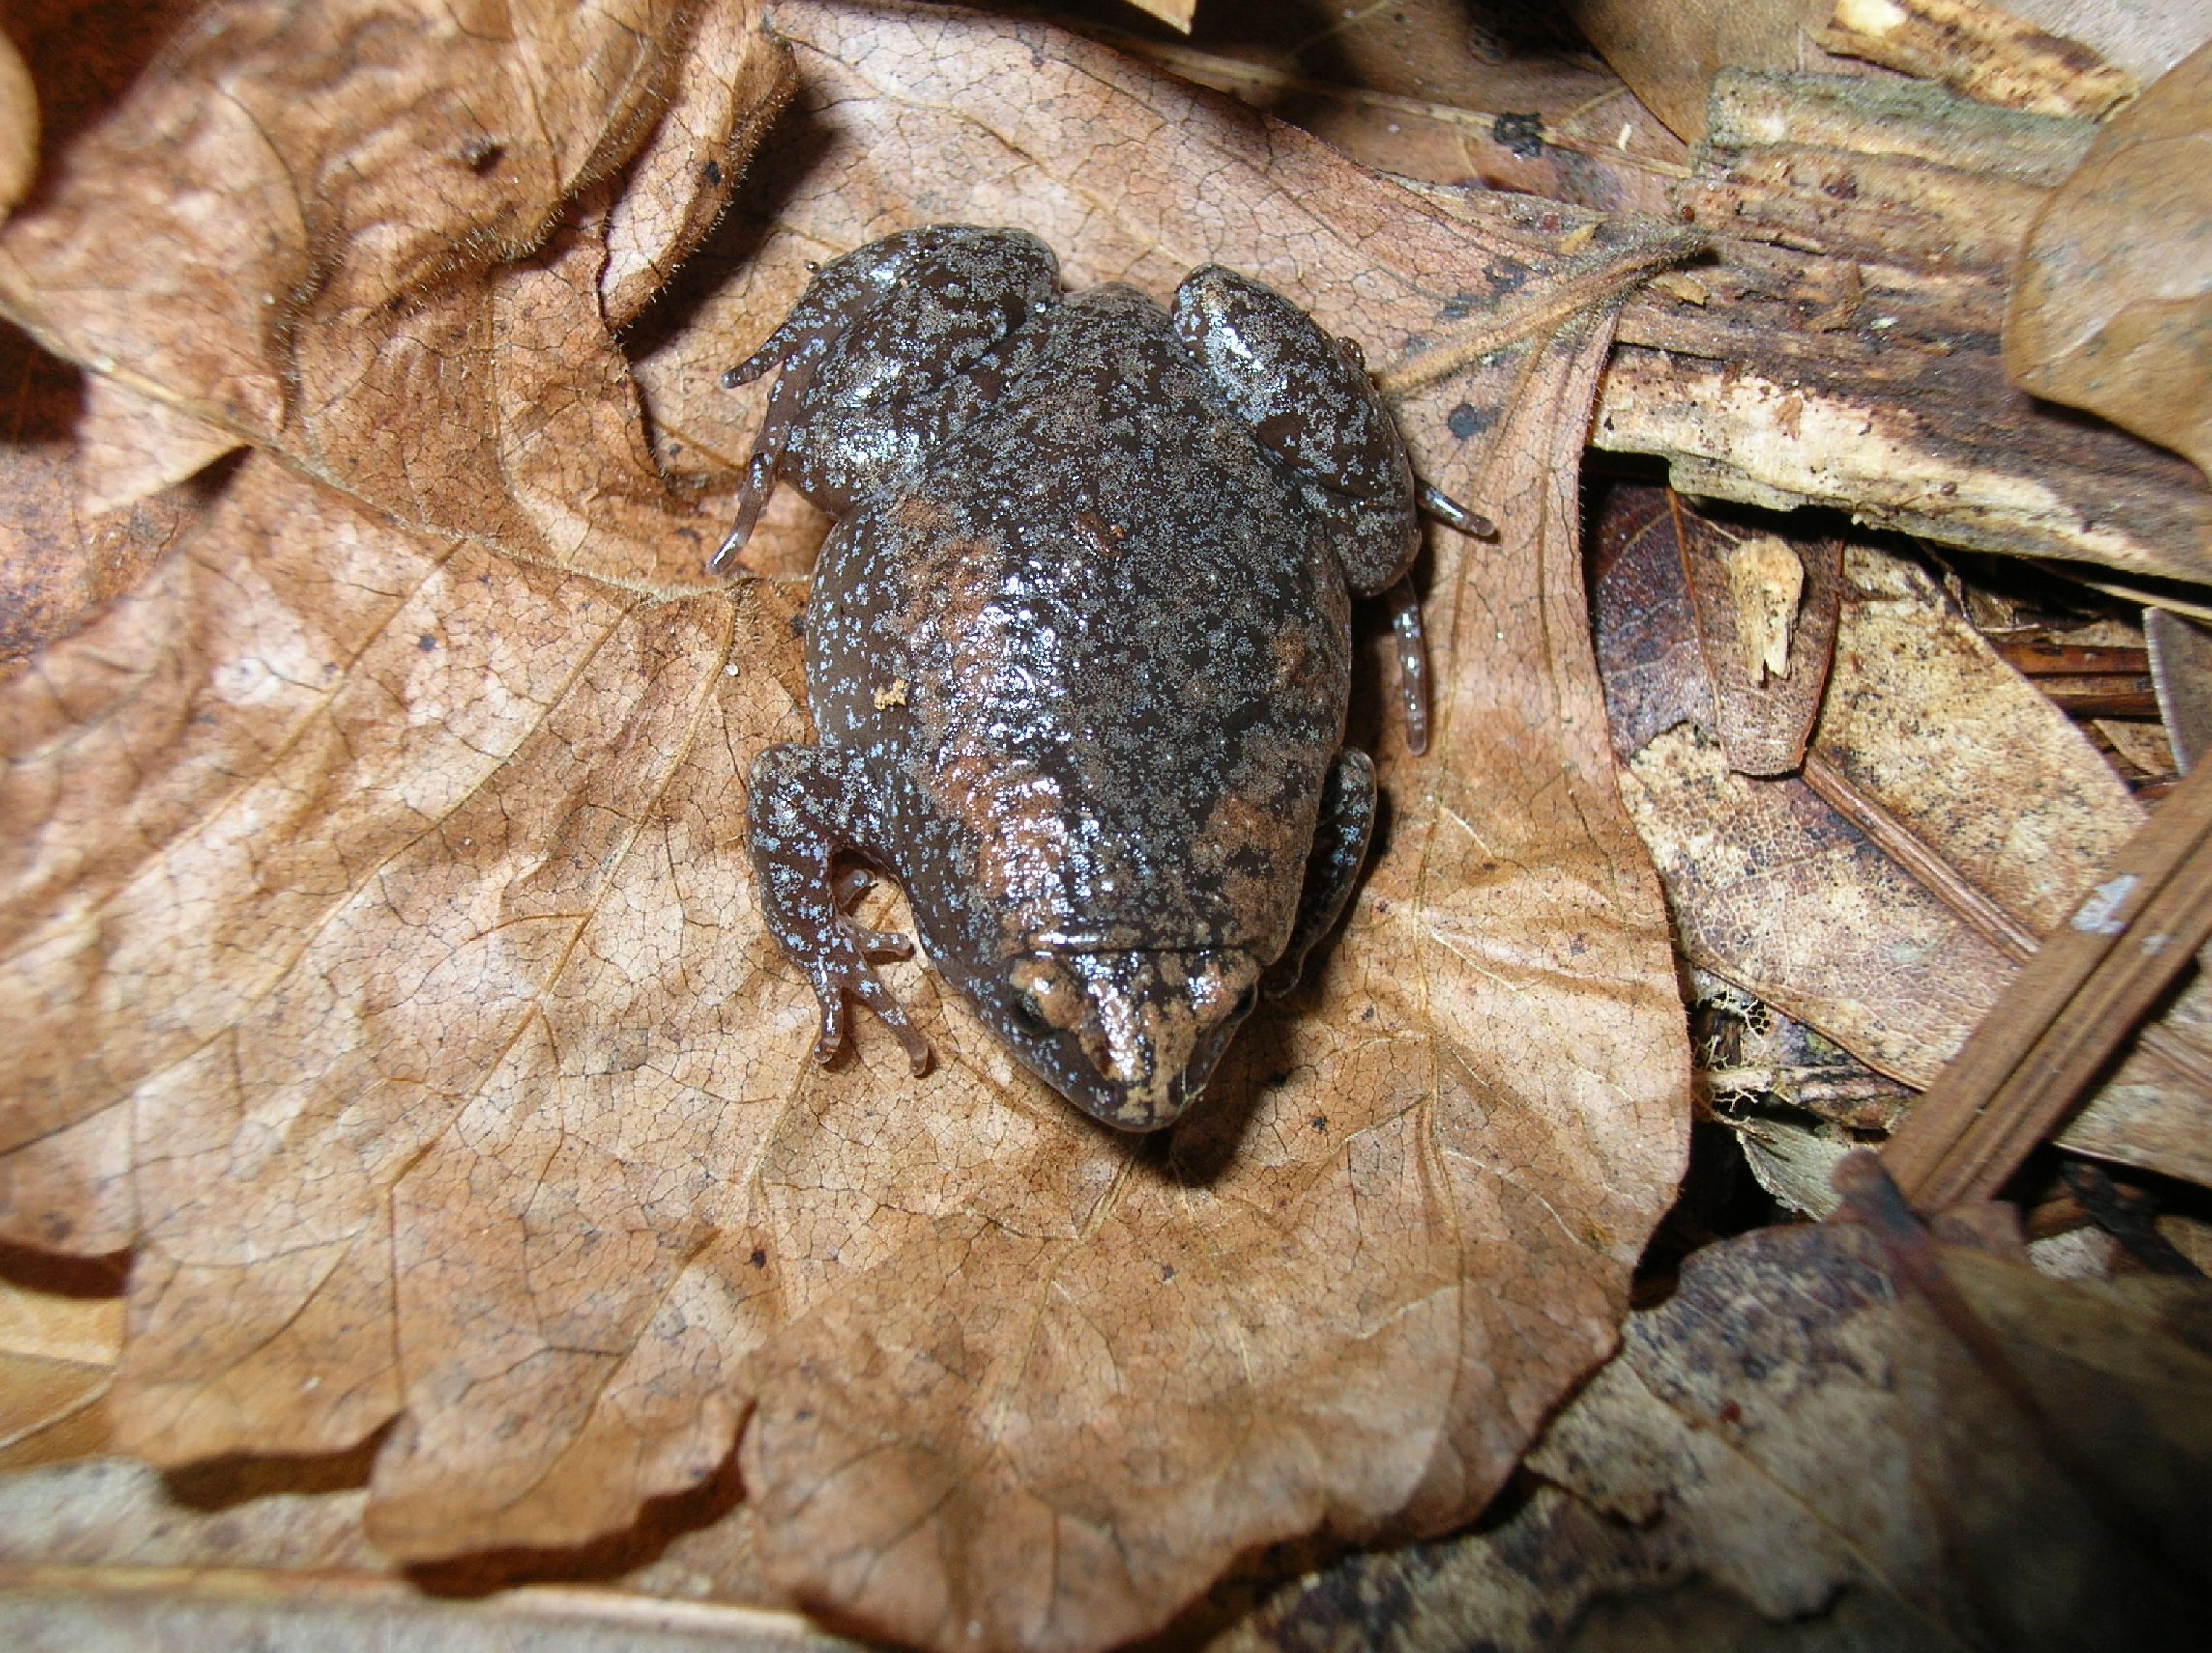 Eastern Narrow-Mouthed Toad - Chattahoochee River National Recreation